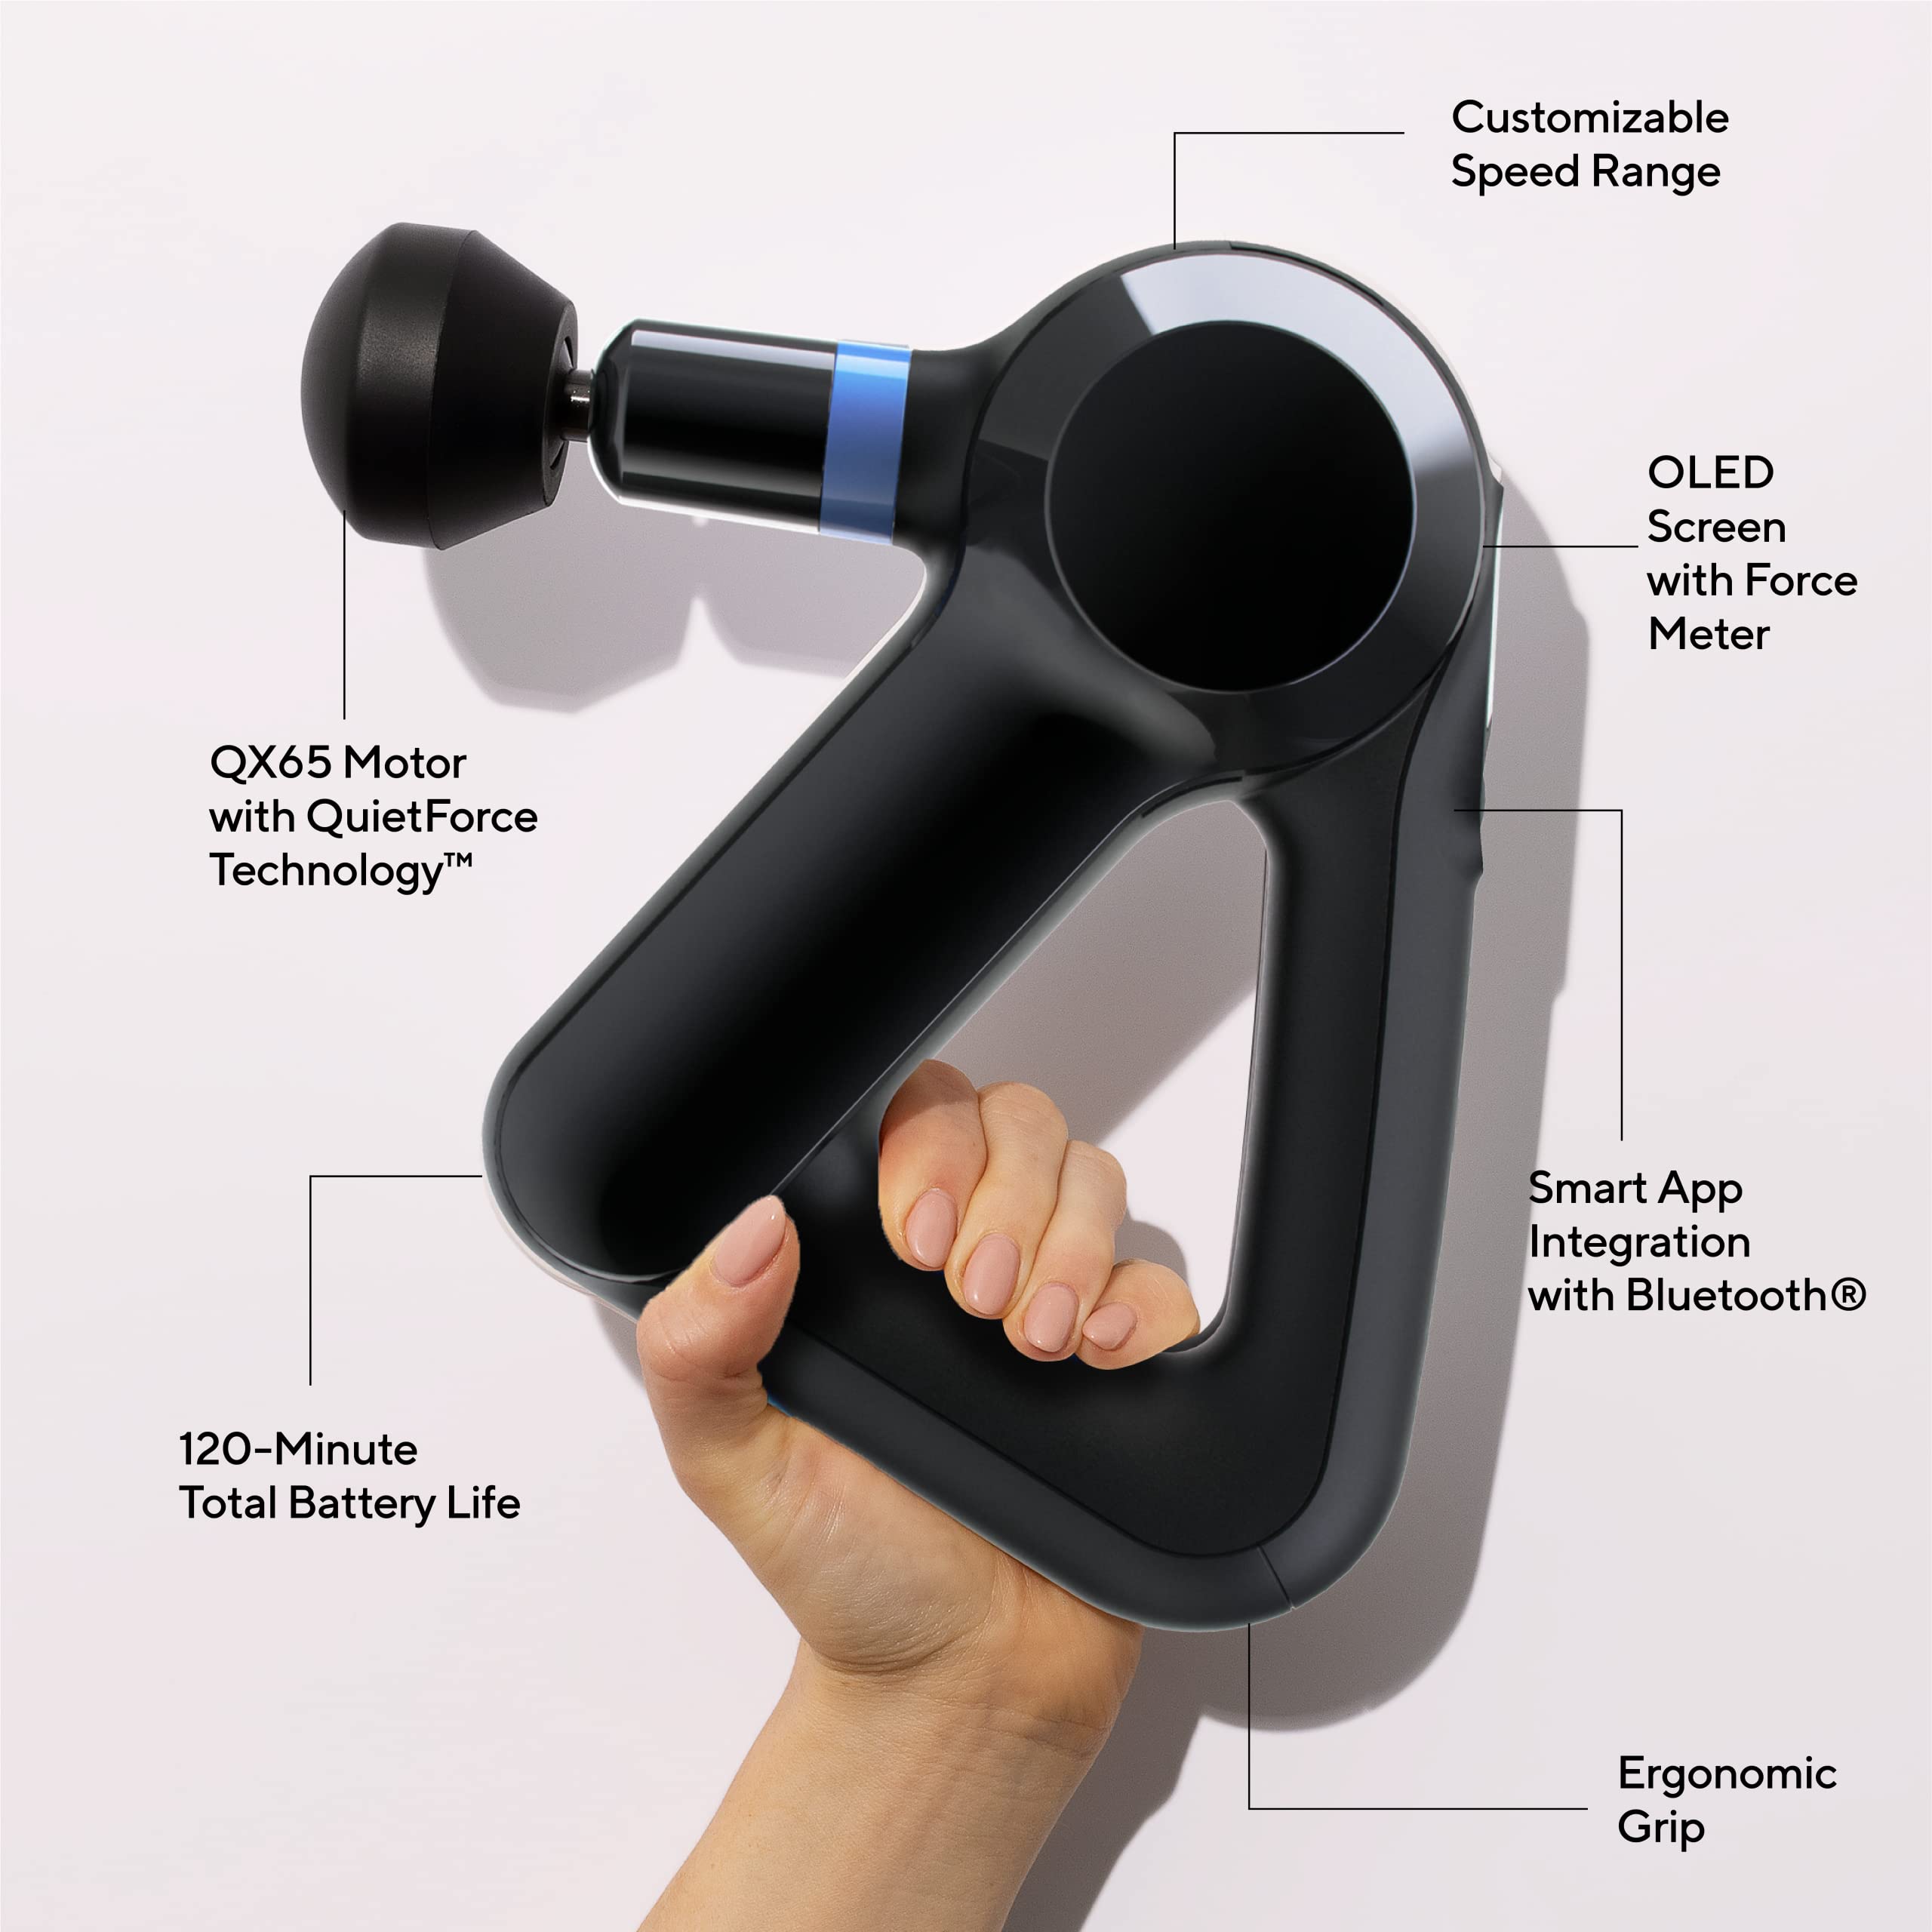 TheraGun Elite Ultra-Quiet Percussion Massage Gun for Deep Tissue Muscle Pain Relief, Handheld Electric Massager Perfect for Neck, Back, and Full Body Tension, Bluetooth Connectivity, 4th Gen